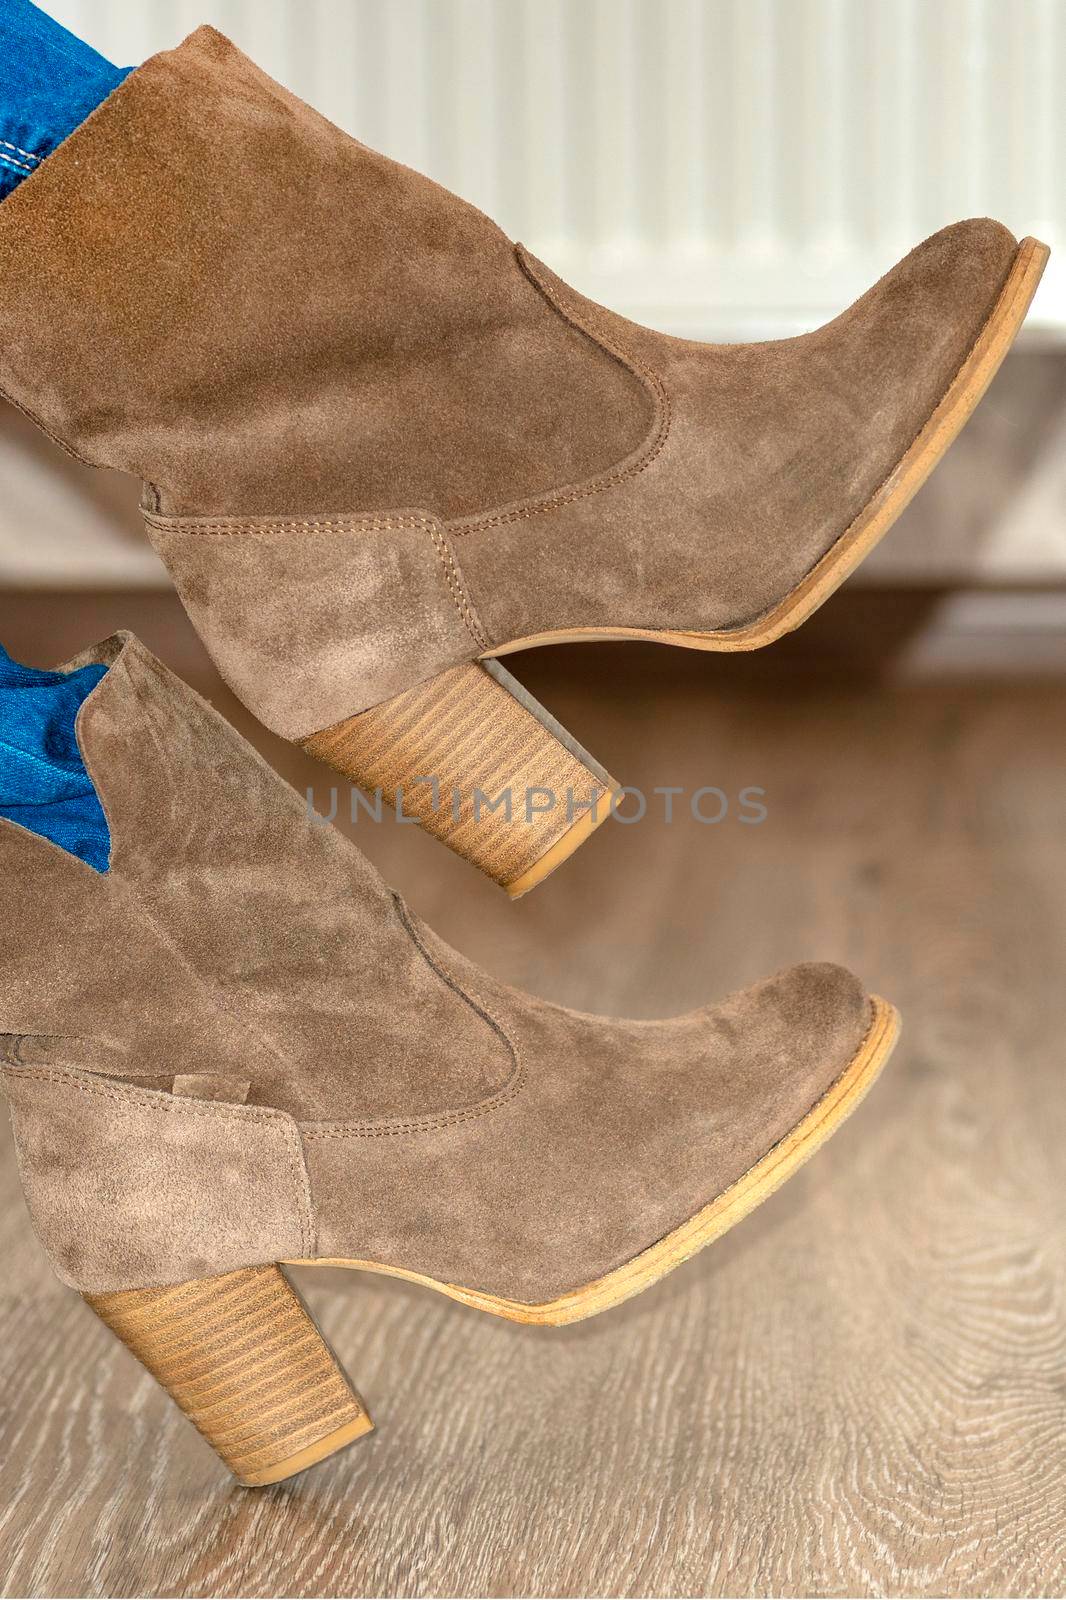 close-up. Women's suede boots. Women's brown shoes. Warm boots are put on legs at the girl. Shoe fitting.Concept of buying, trying on shoes and boots.